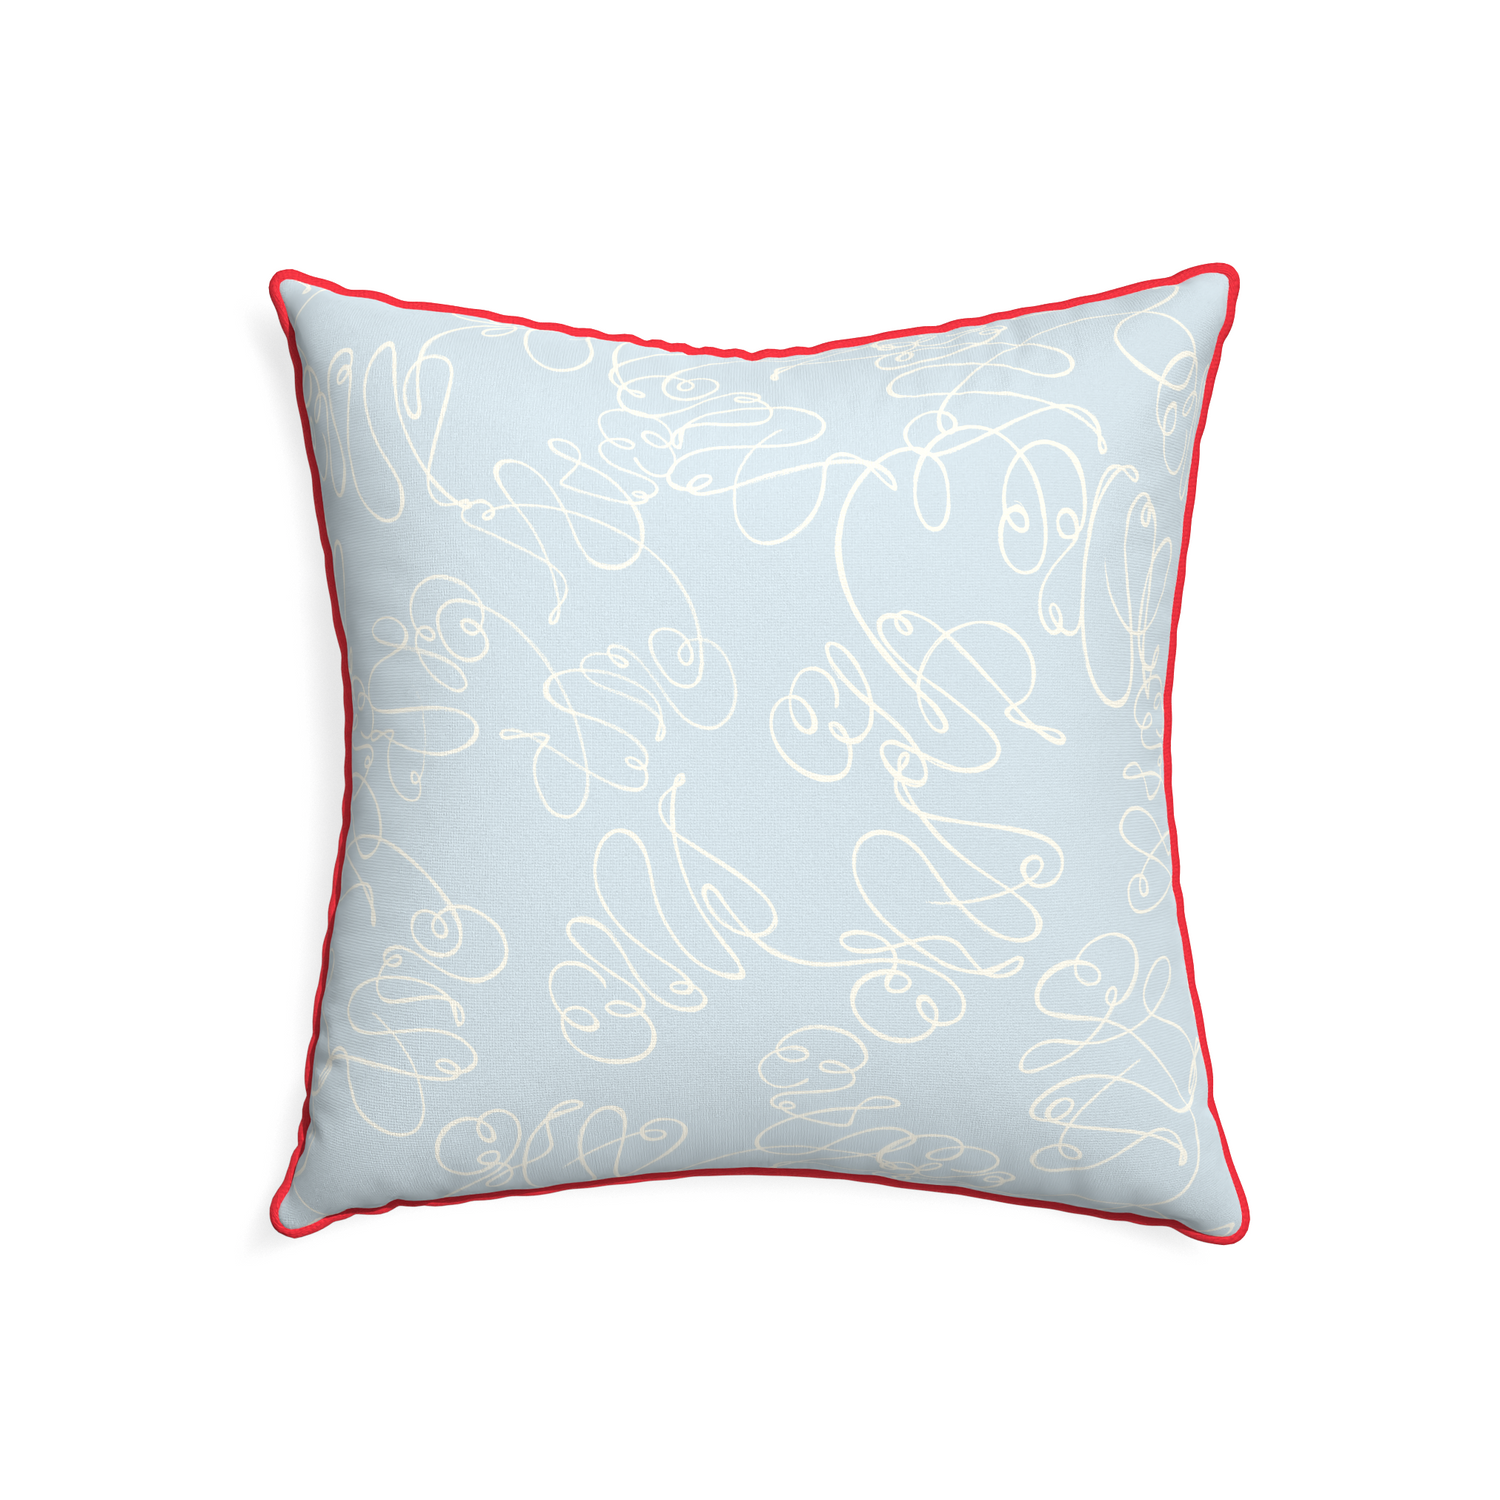 22-square mirabella custom pillow with cherry piping on white background